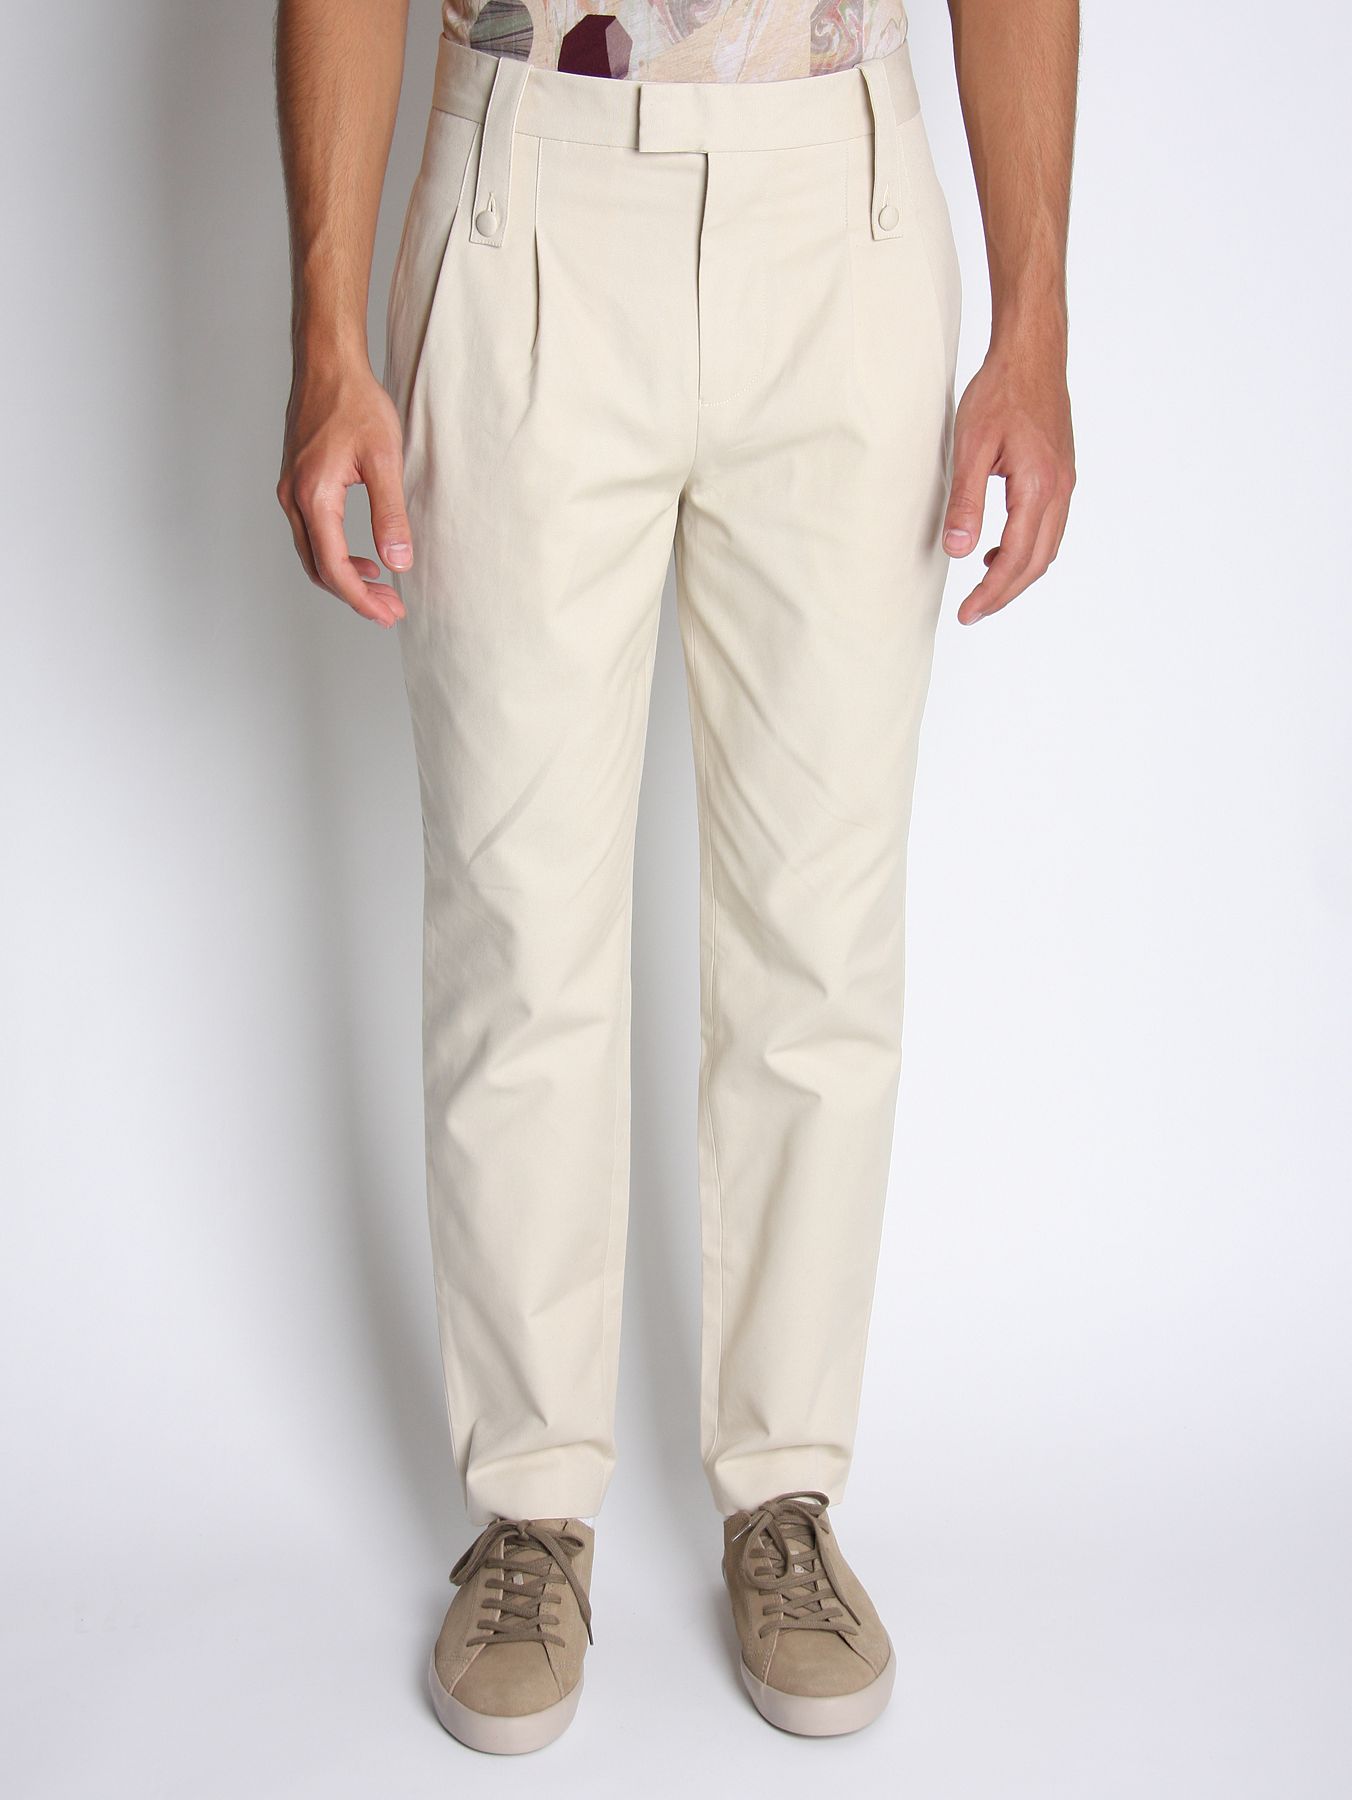 Forgotten future Pleated Formal Trousers in Beige for Men (cream) | Lyst